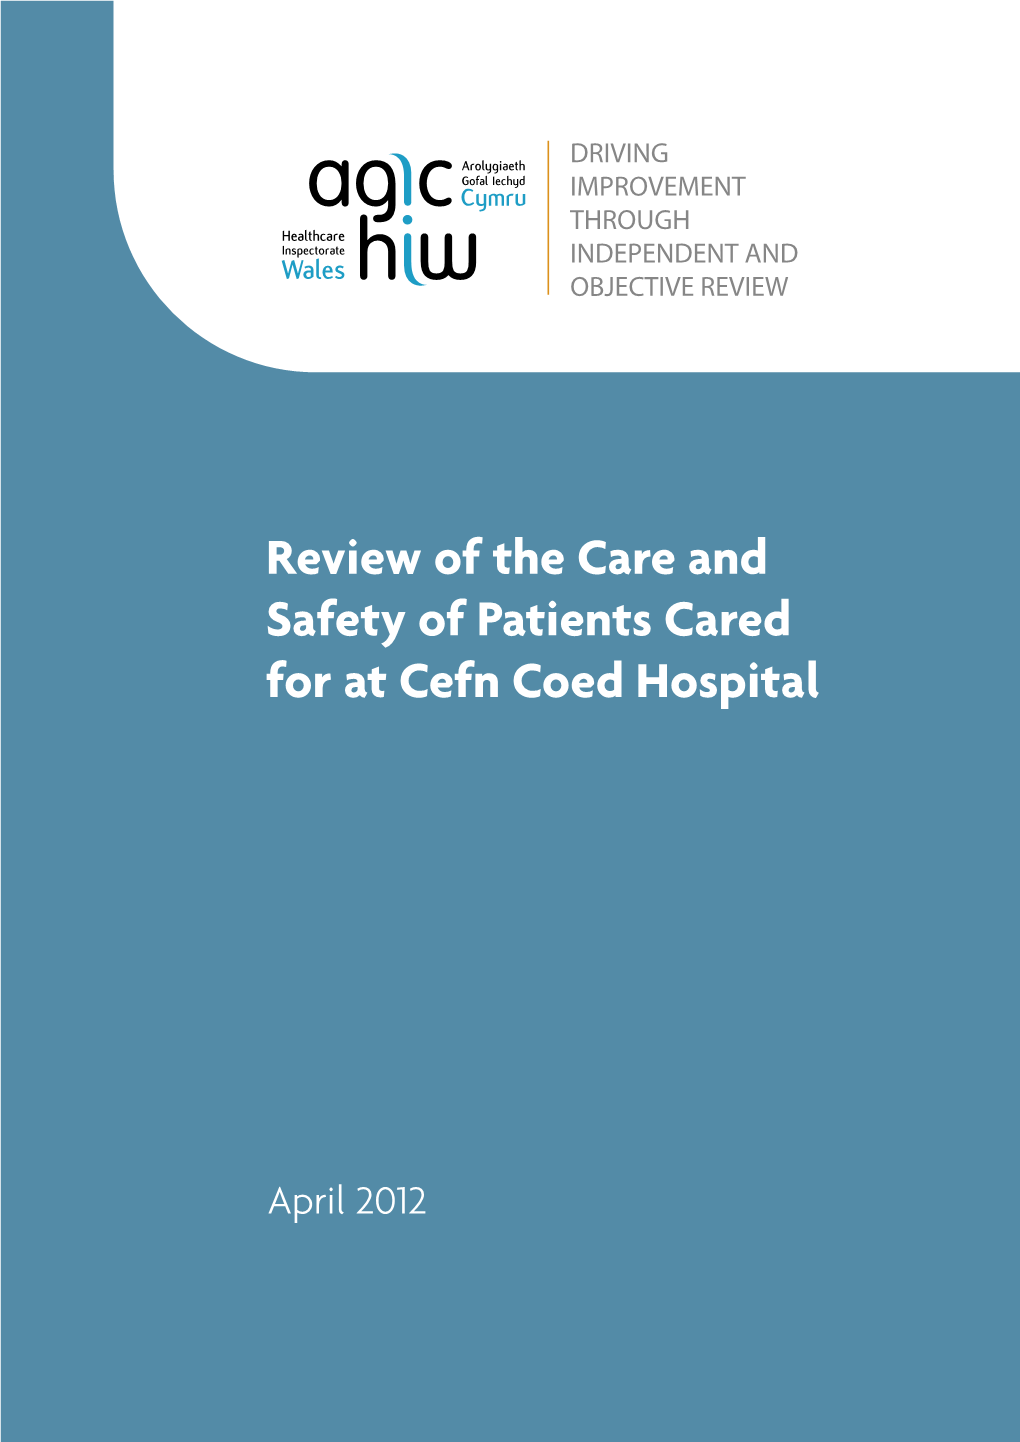 Review of the Care and Safety of Patients Cared for at Cefn Coed Hospital